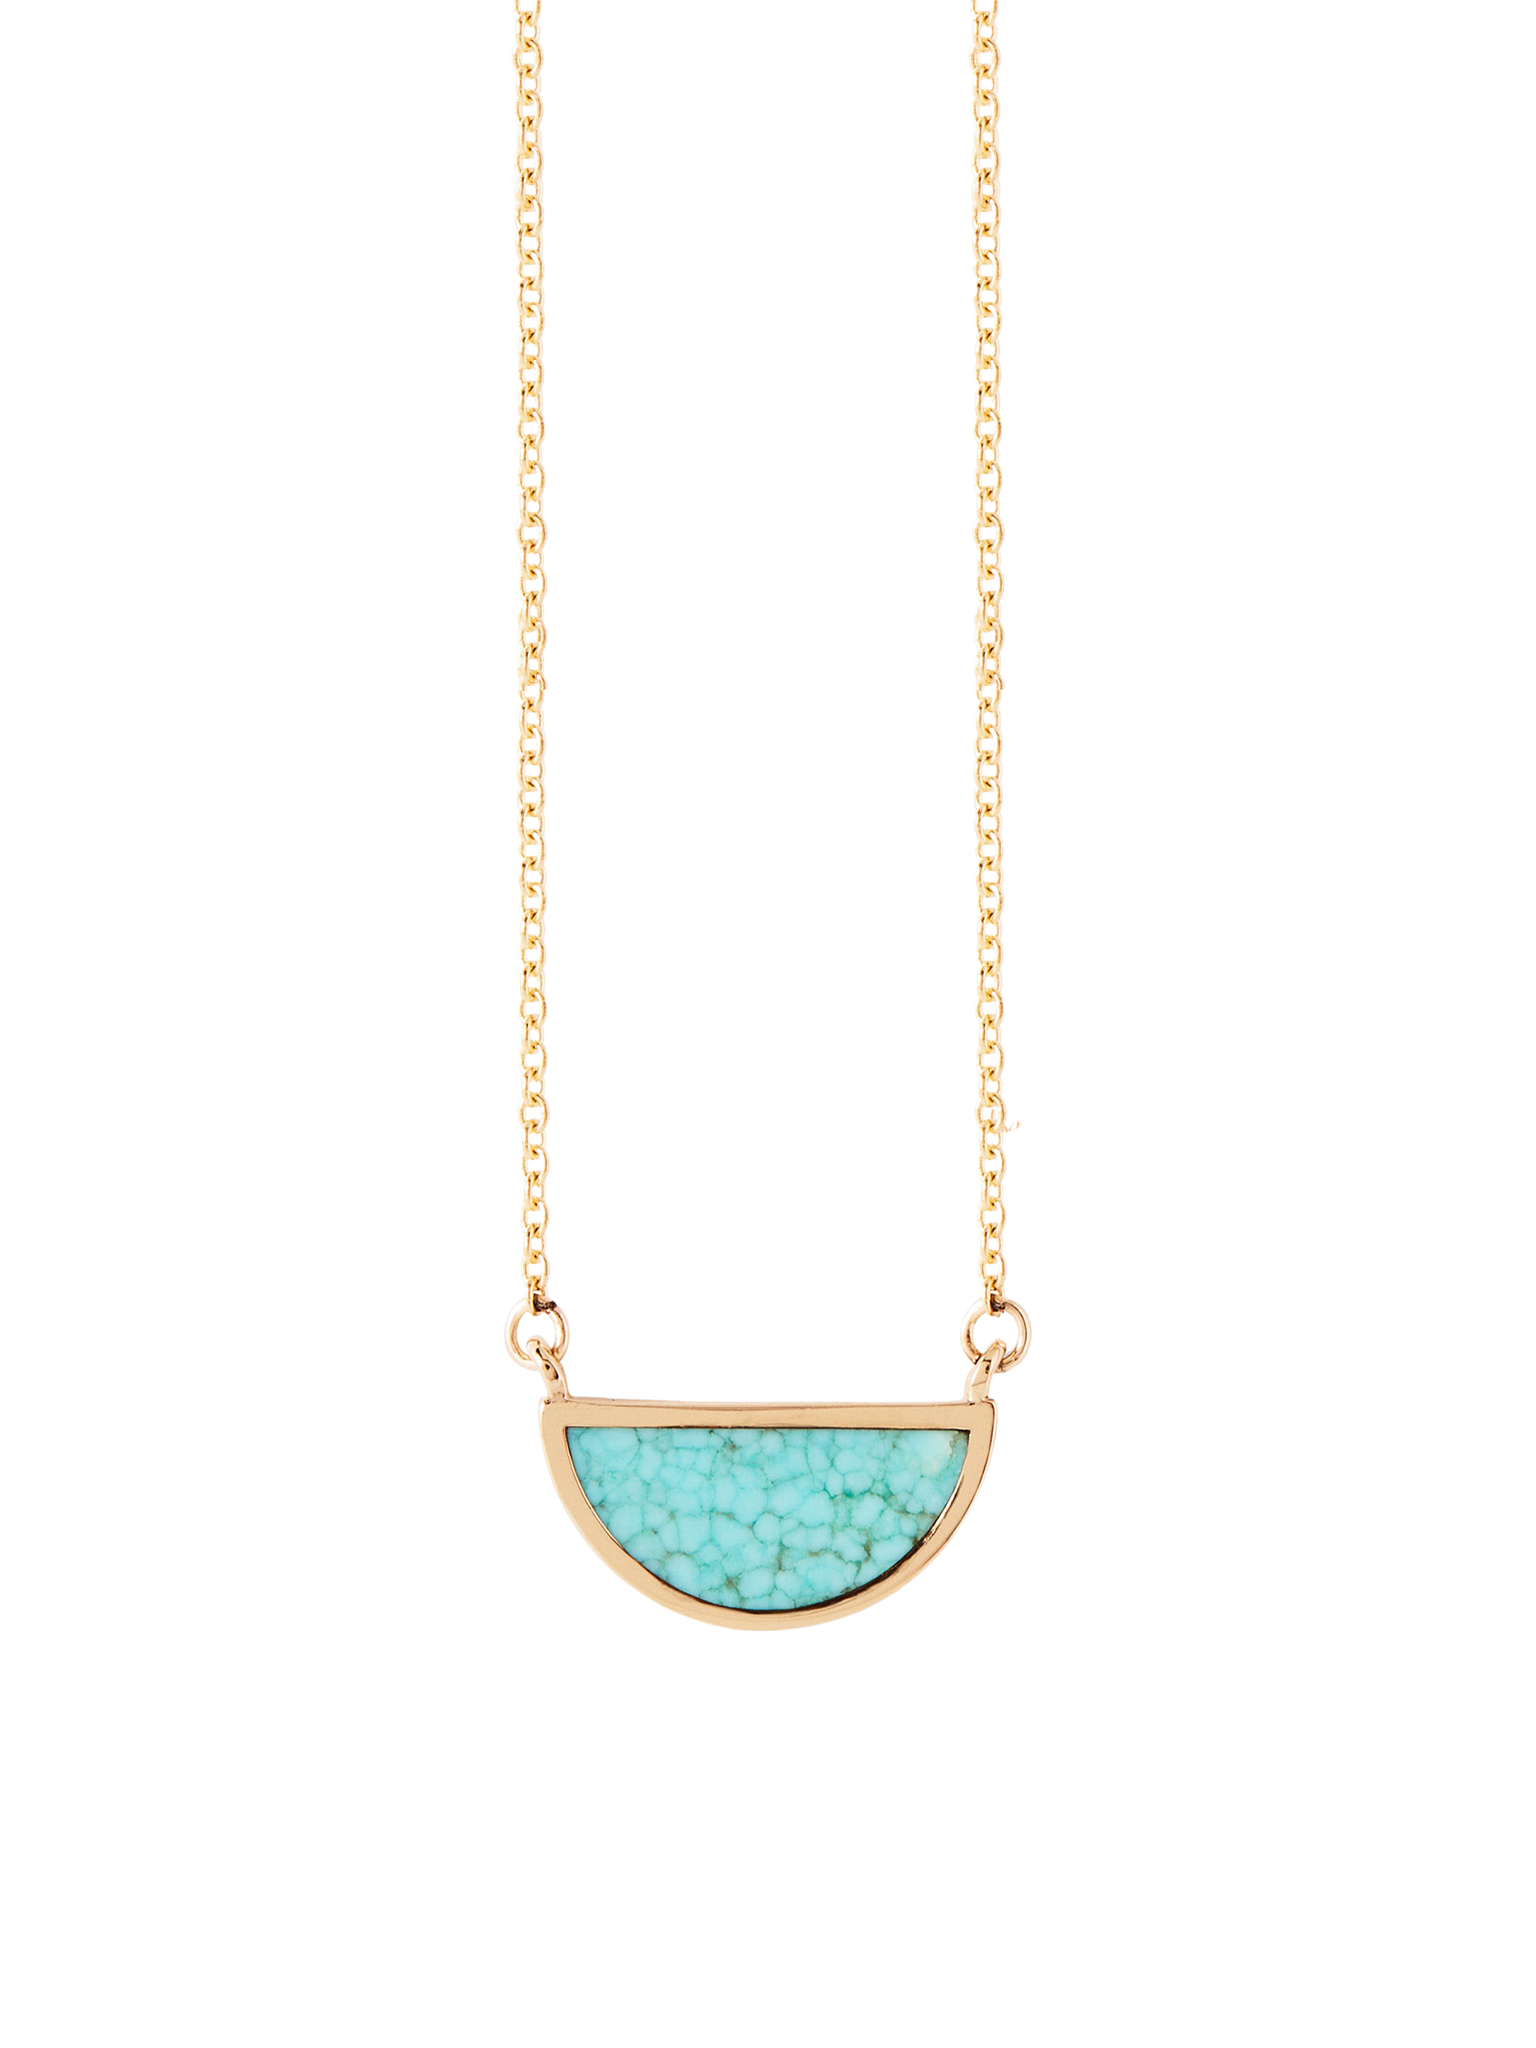 One half turquoise pendant necklace